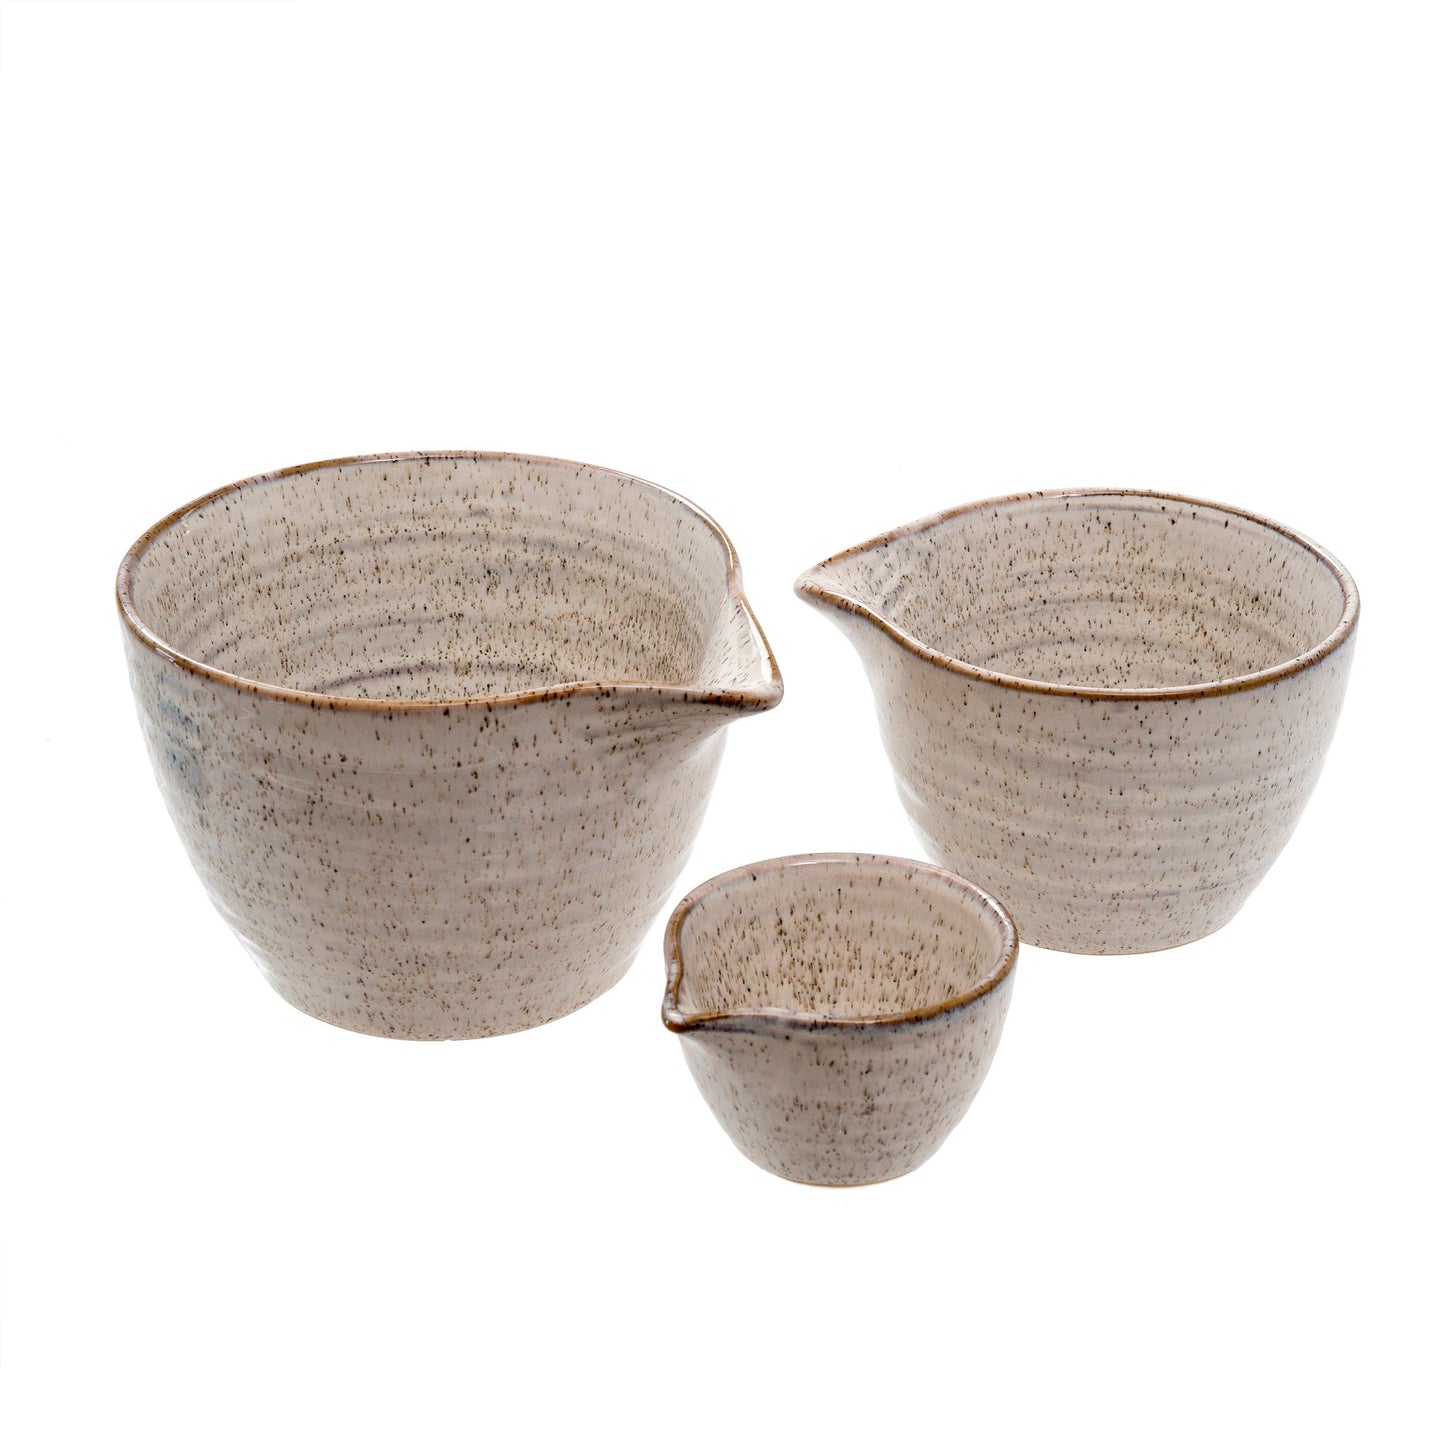 Galiano Spouted Bowls